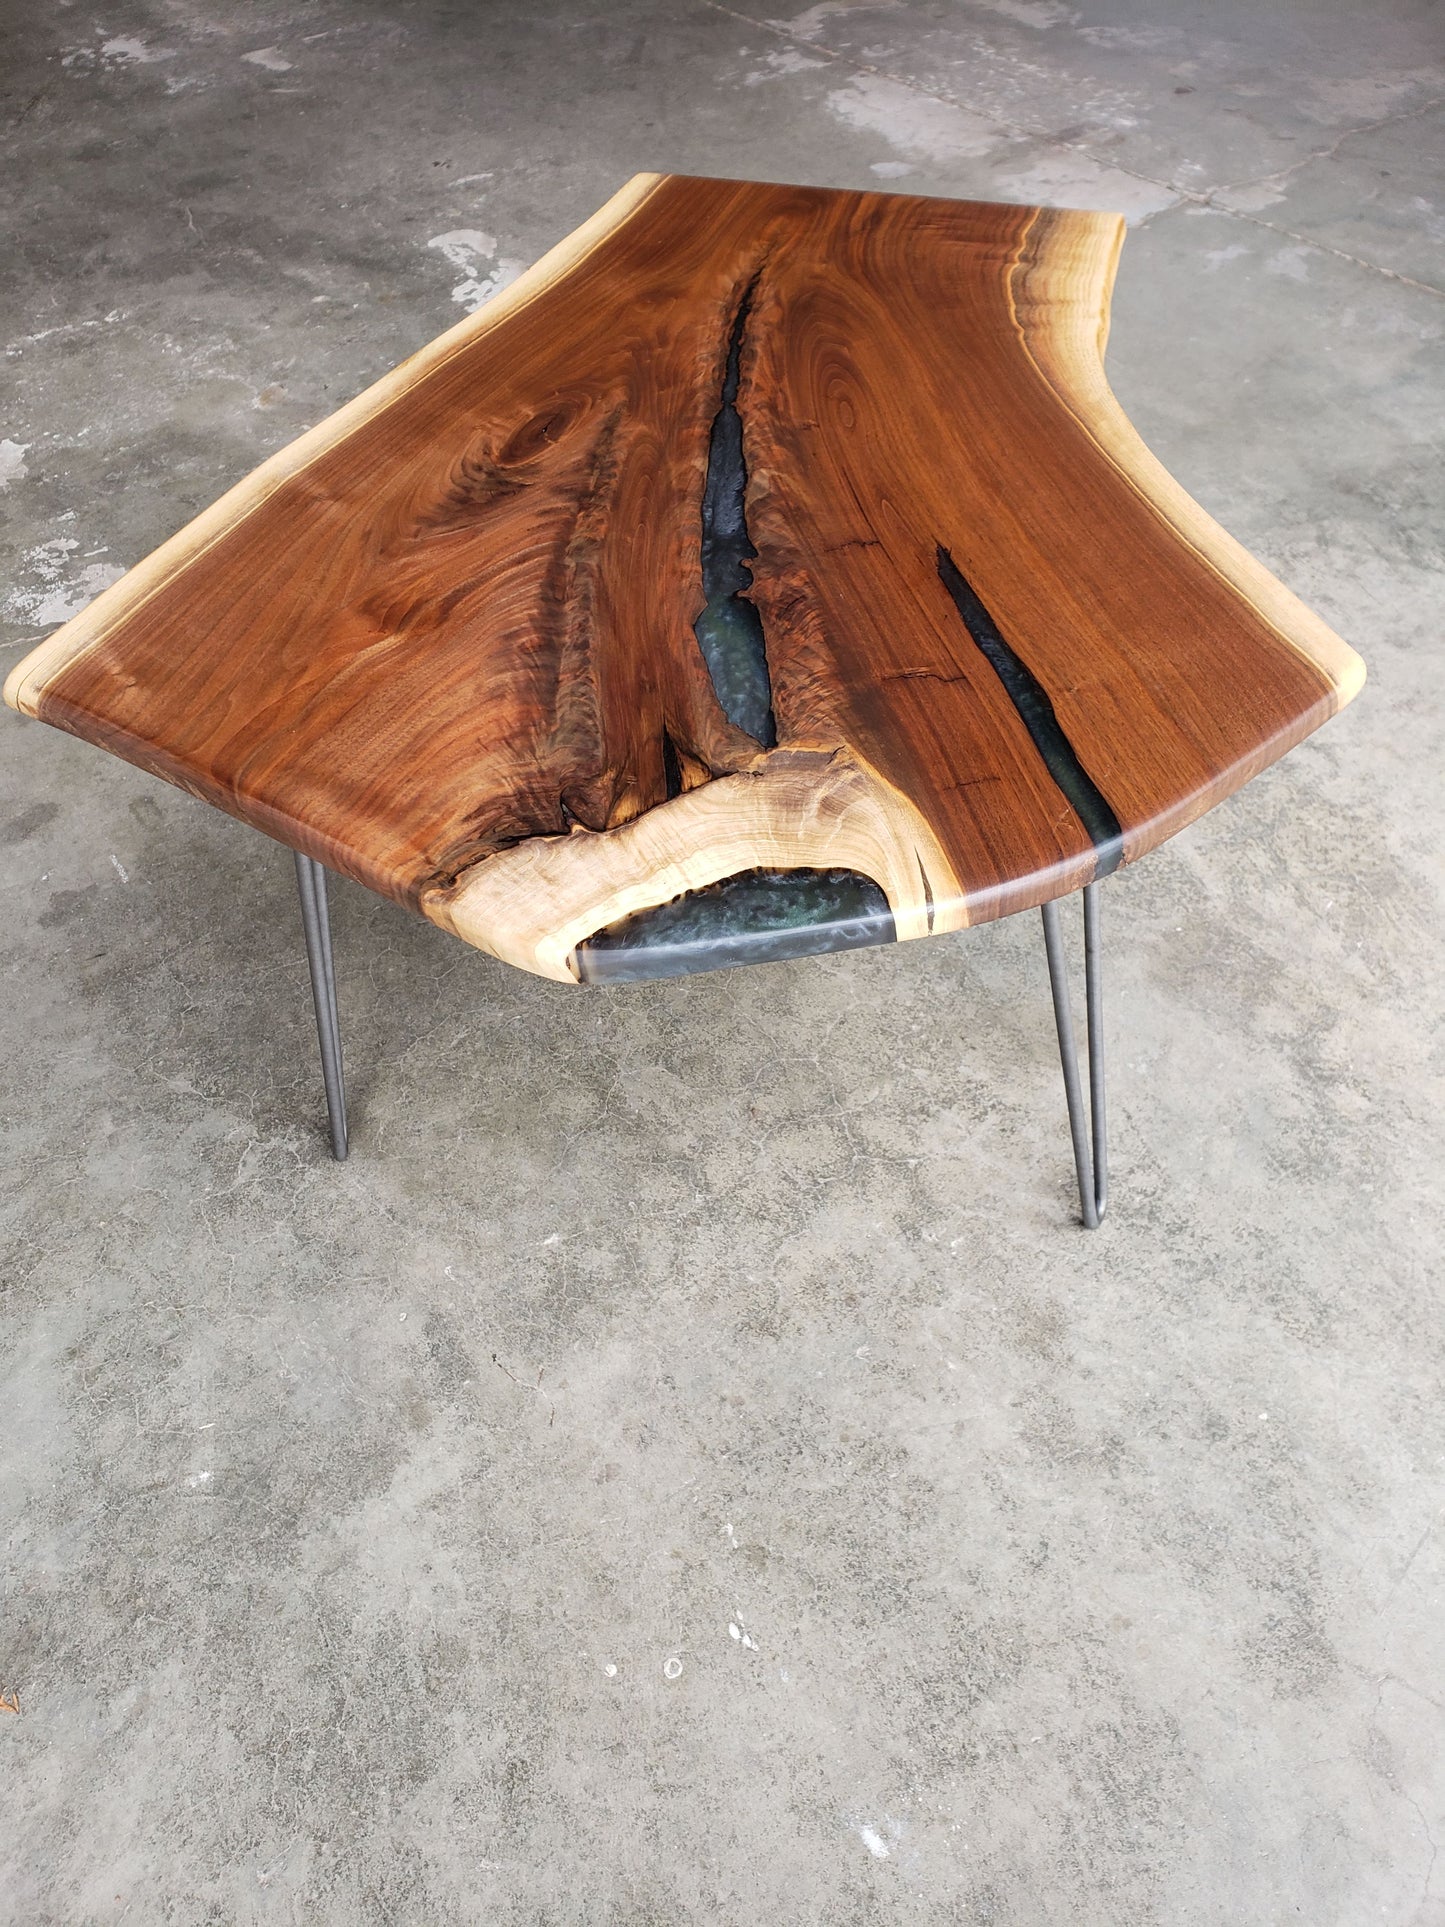 Live-Edge Black Walnut Side Table with Dolphin Grey Epoxy Resin Fills